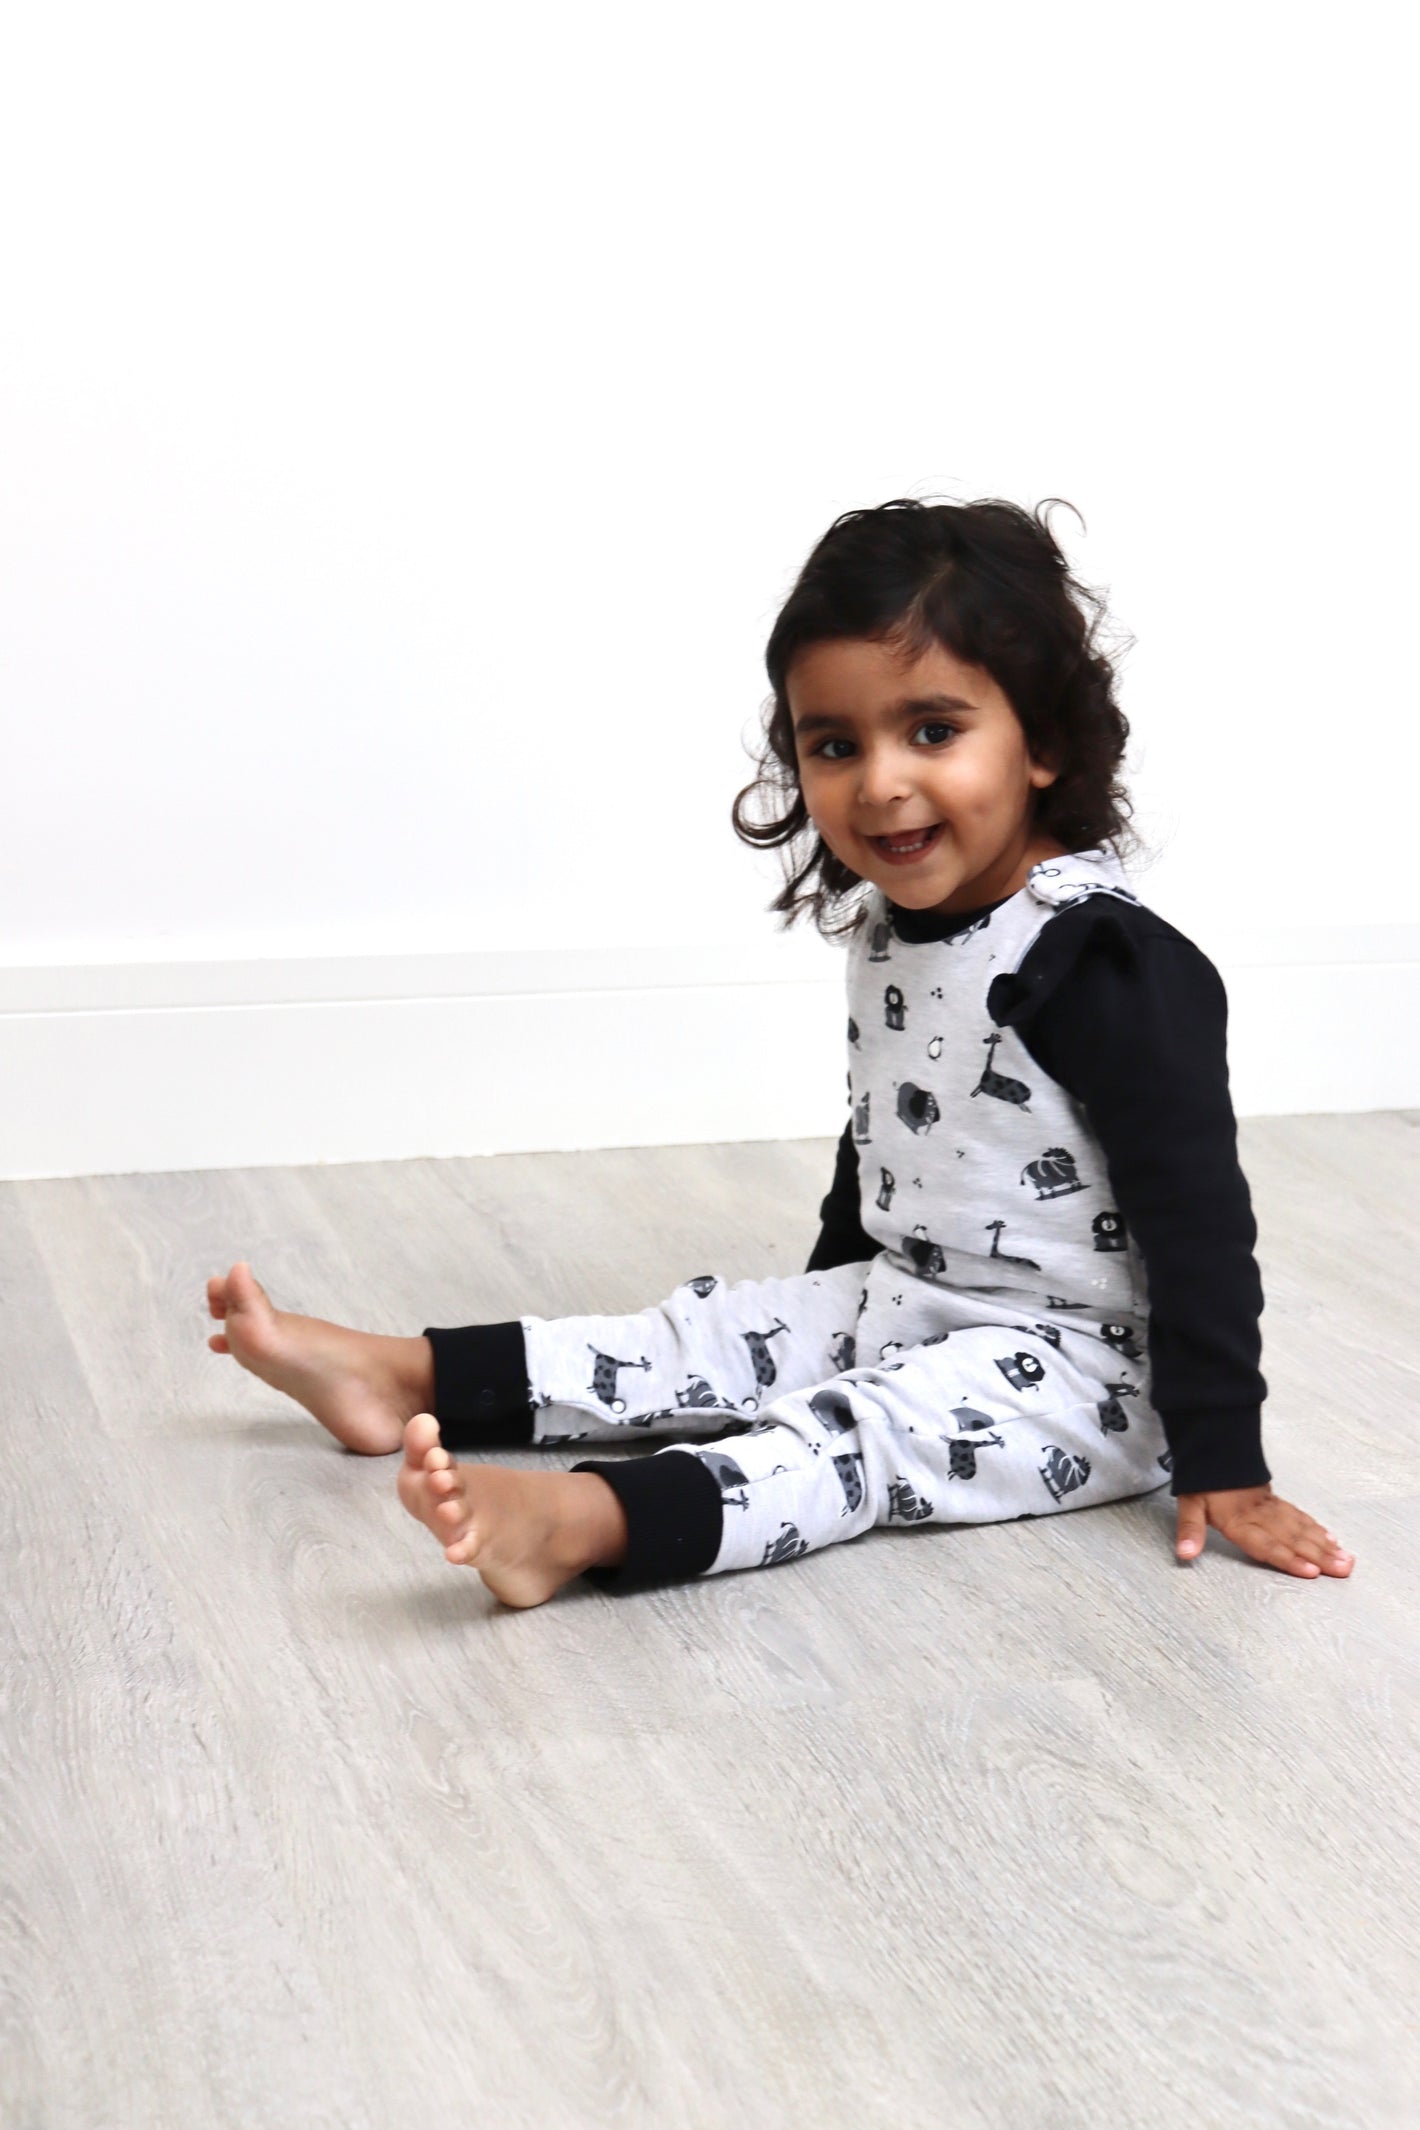 Buy 2 for £40 offer on our kids rompers and dungarees, a saving of £10. Kids rompers and dungarees, made in soft jersey fabrics, in timeless prints